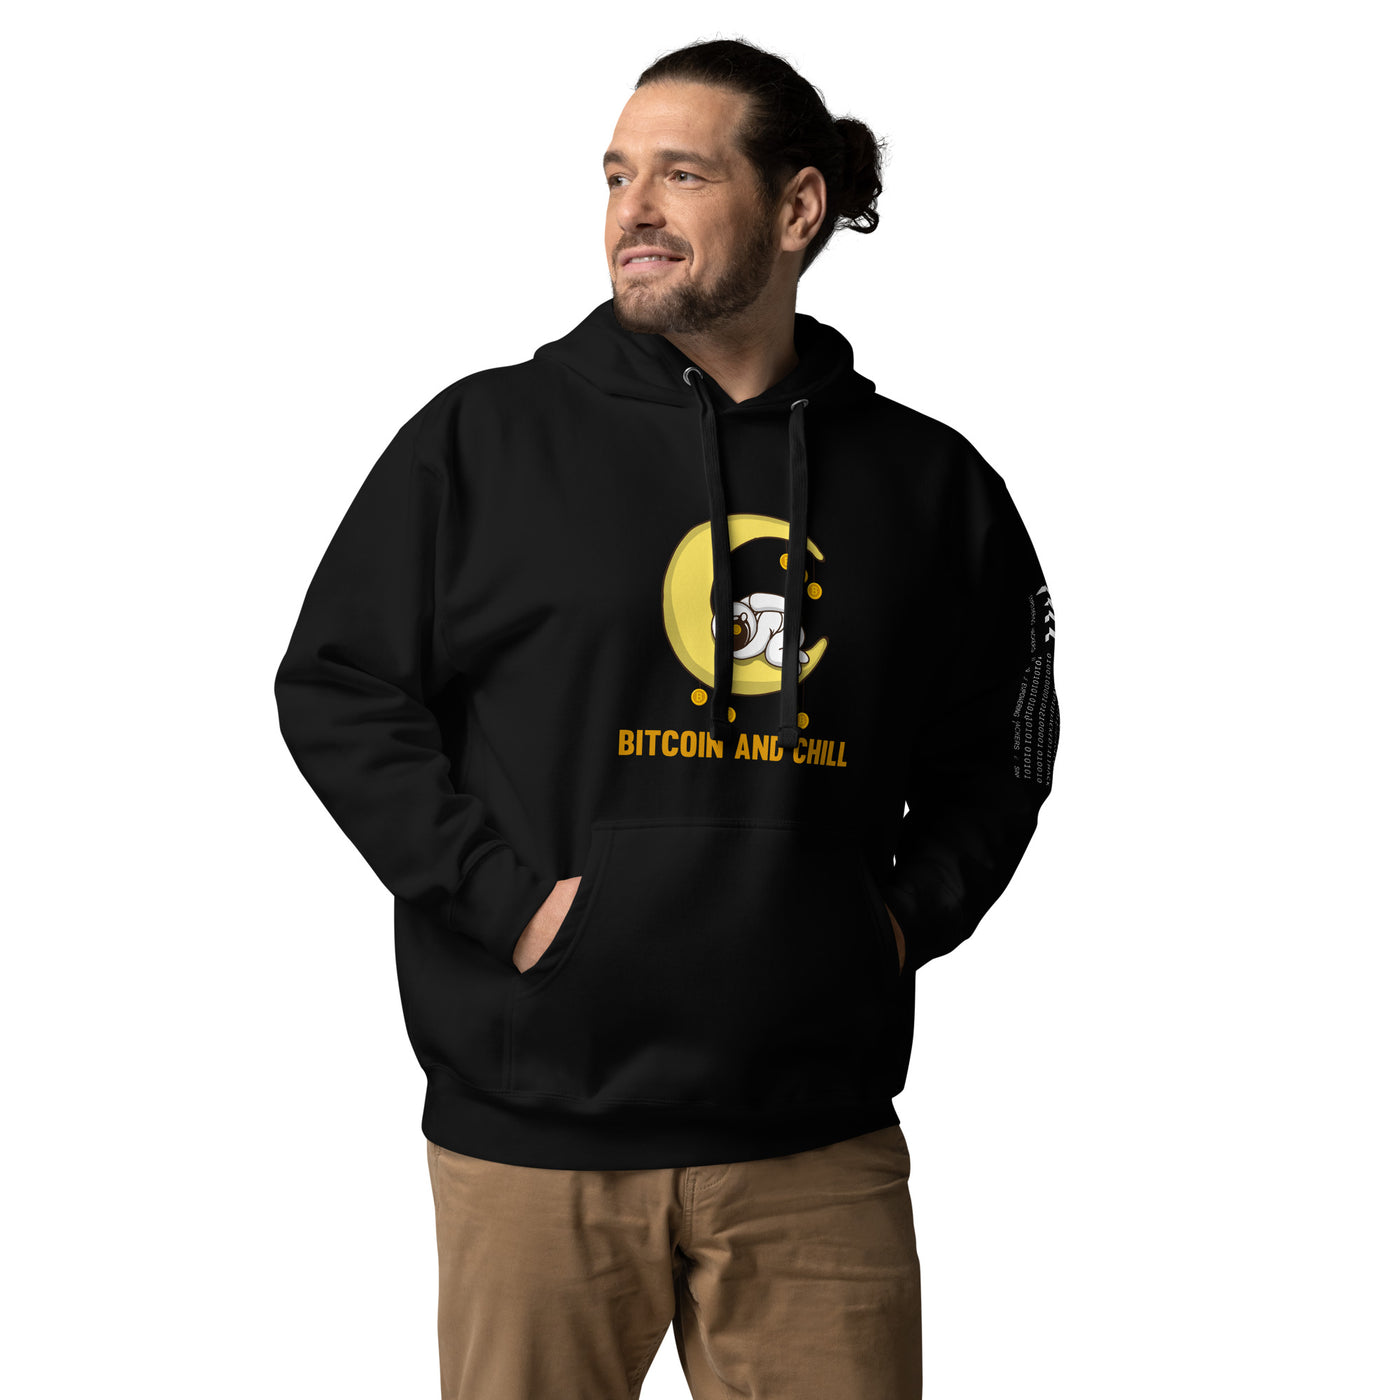 Bitcoin and Chill - Unisex Hoodie